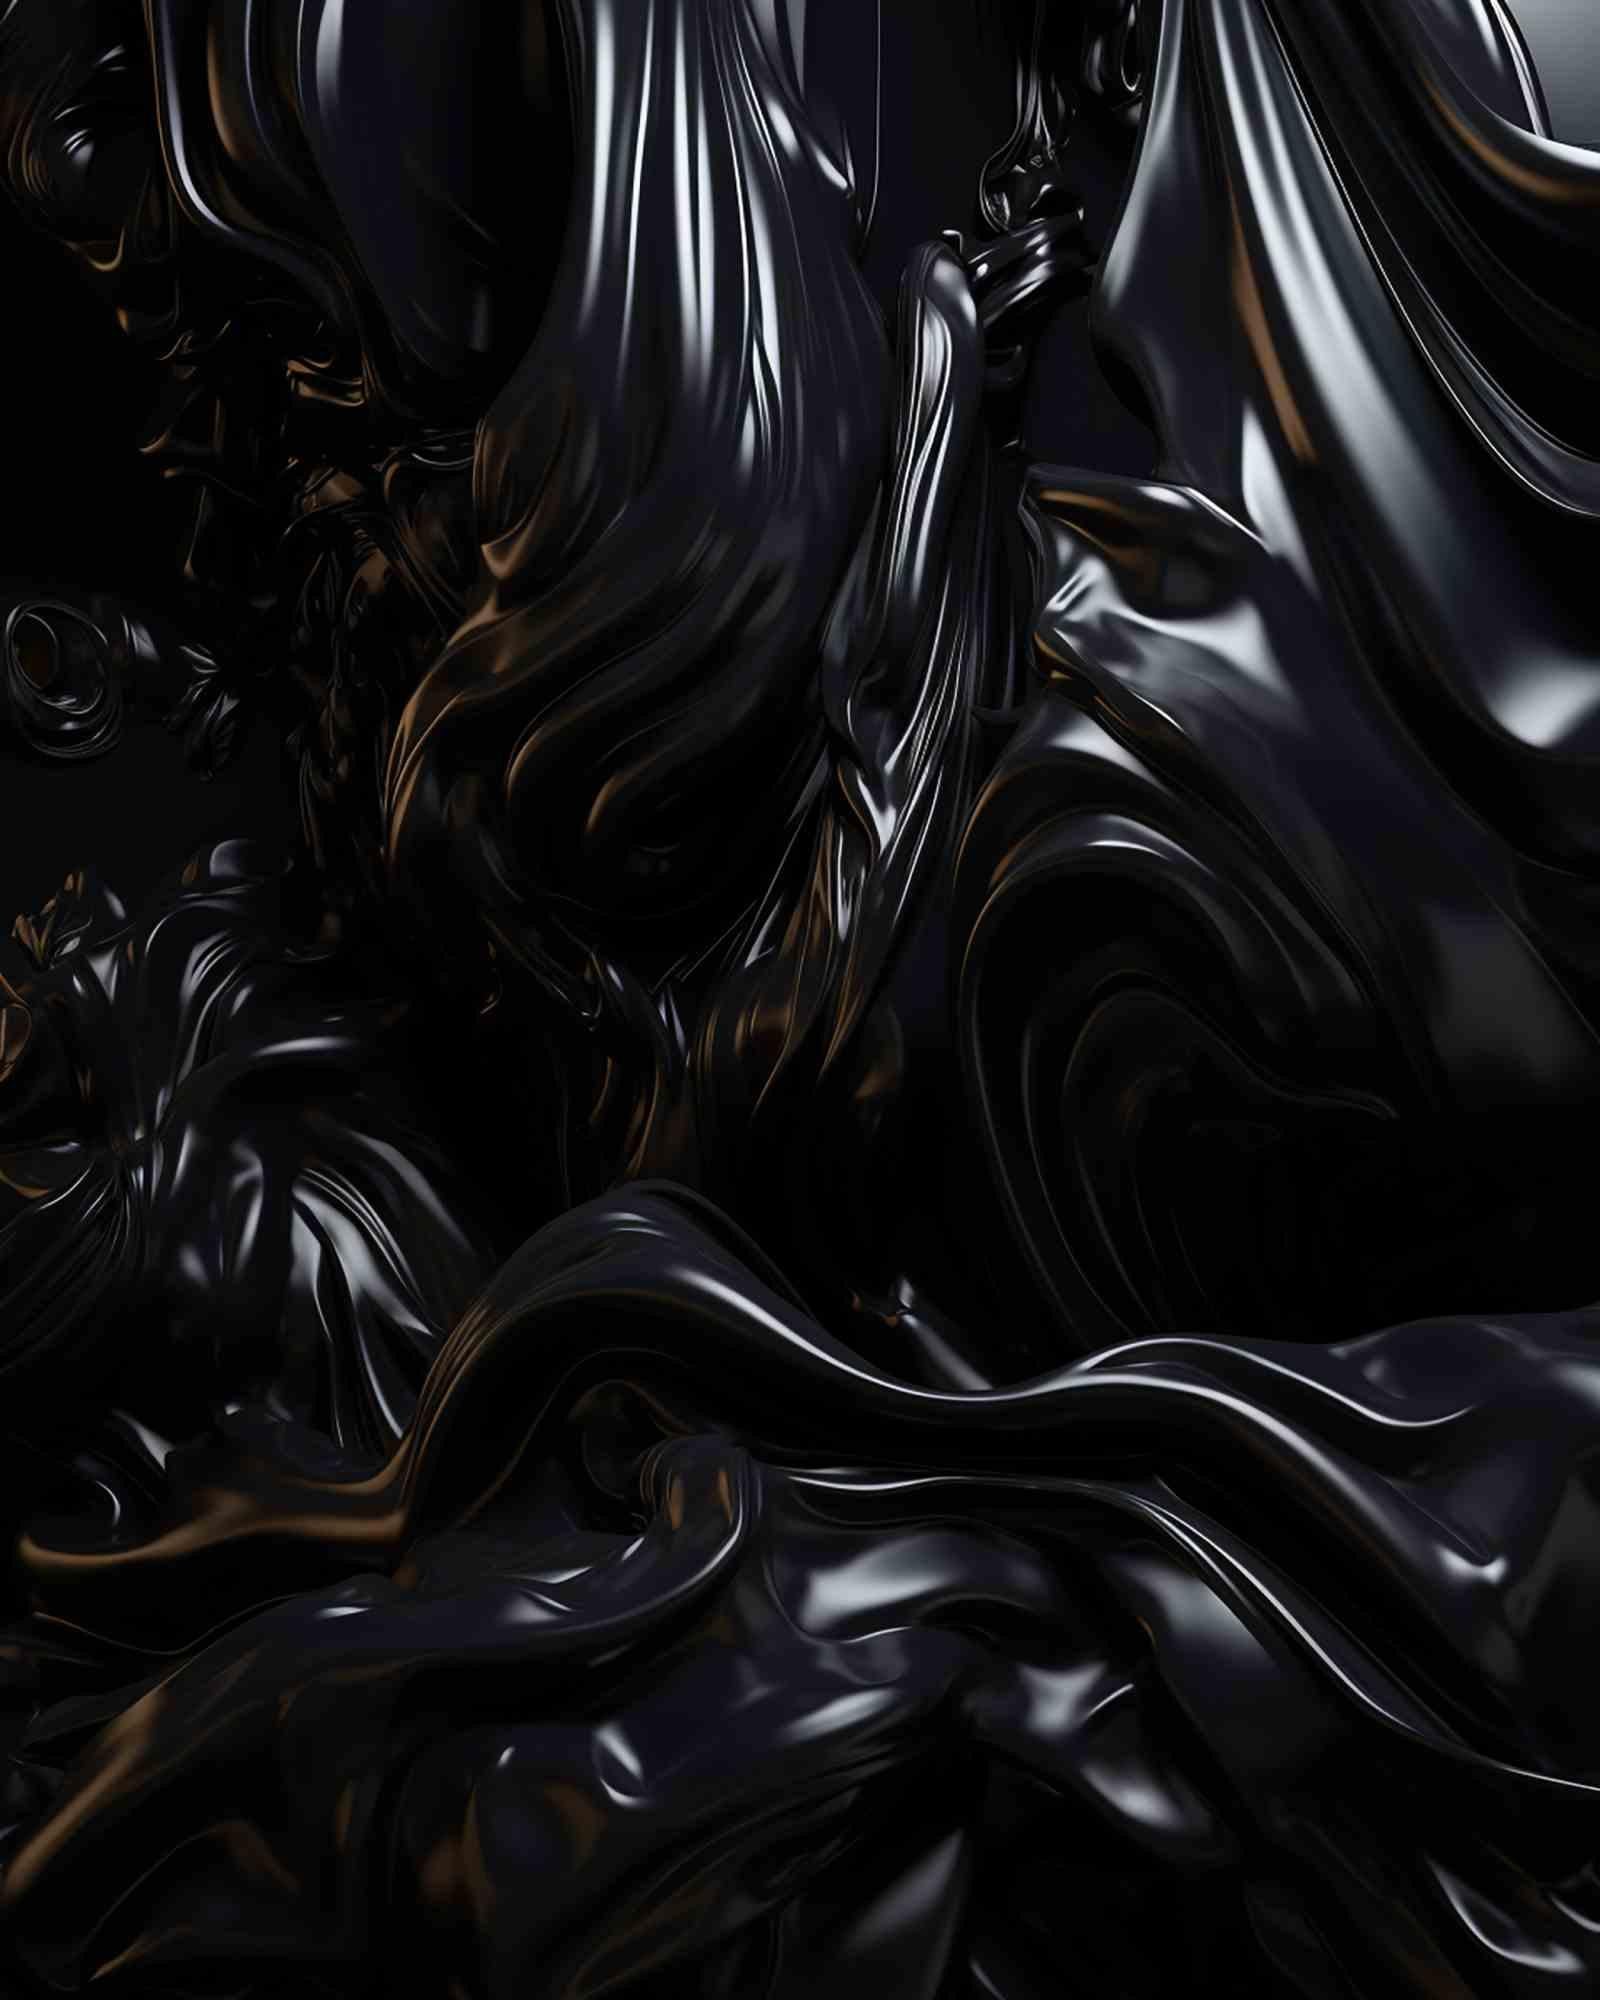 Dark Mirage casts an enchanting spell, where the fluidity of silver transforms into an ephemeral vision. The canvas captures the mirage of a liquid silver realm, each shimmering droplet a fleeting glimpse into an alternate reality. Reflections and